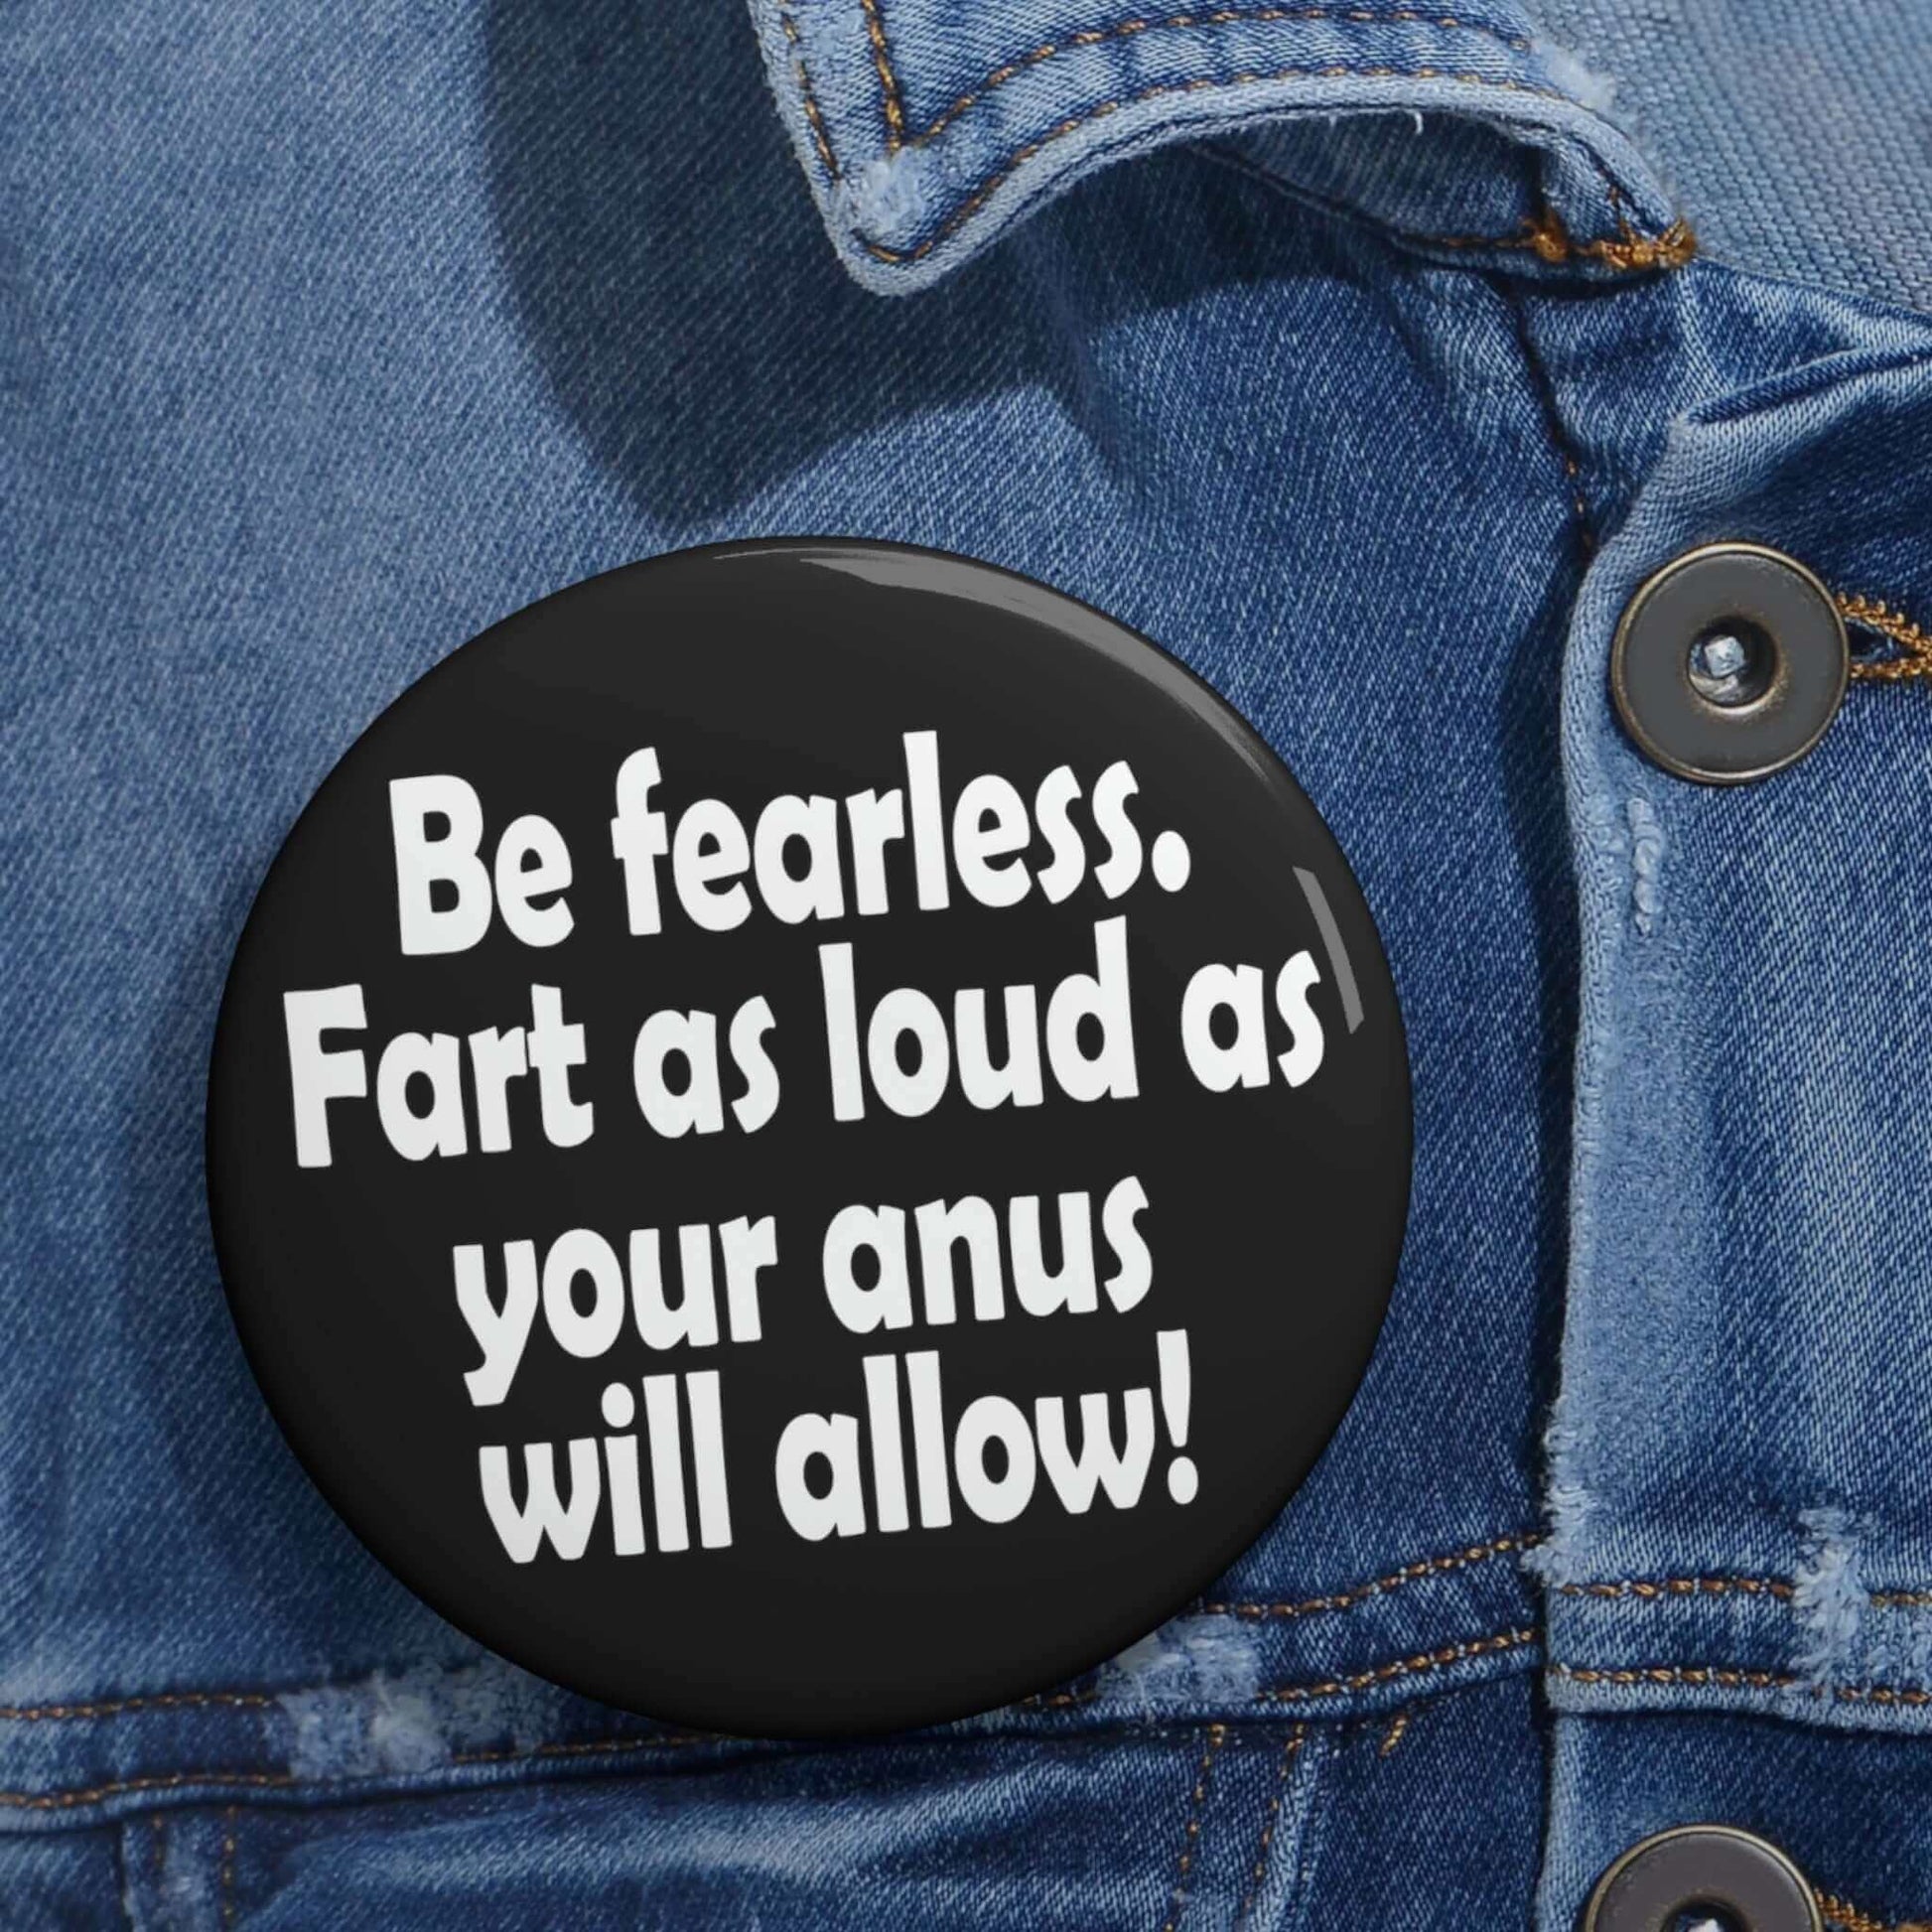 Funny motivational pinback button that says Be fearless. Fart as loud as your anus will allow.